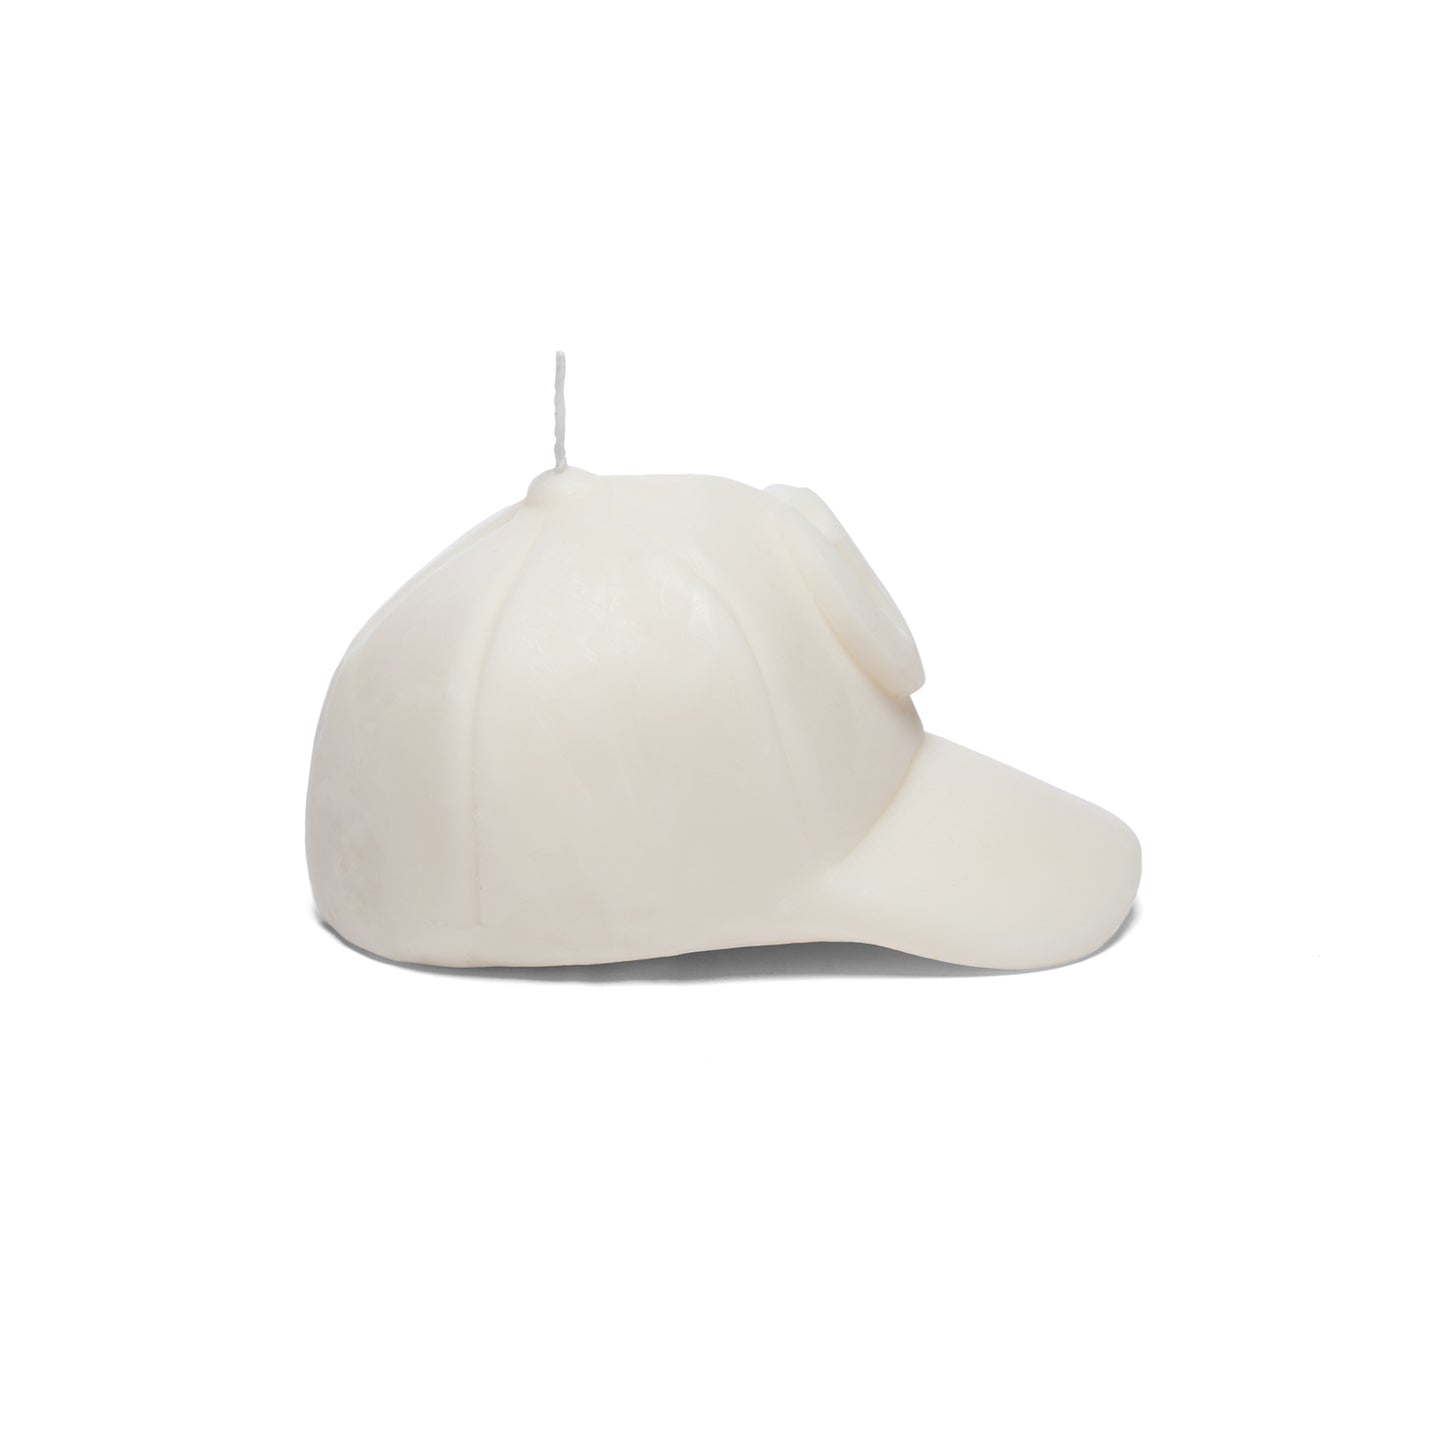 Concepts Headin' Home Ole' Cap Candle (White)